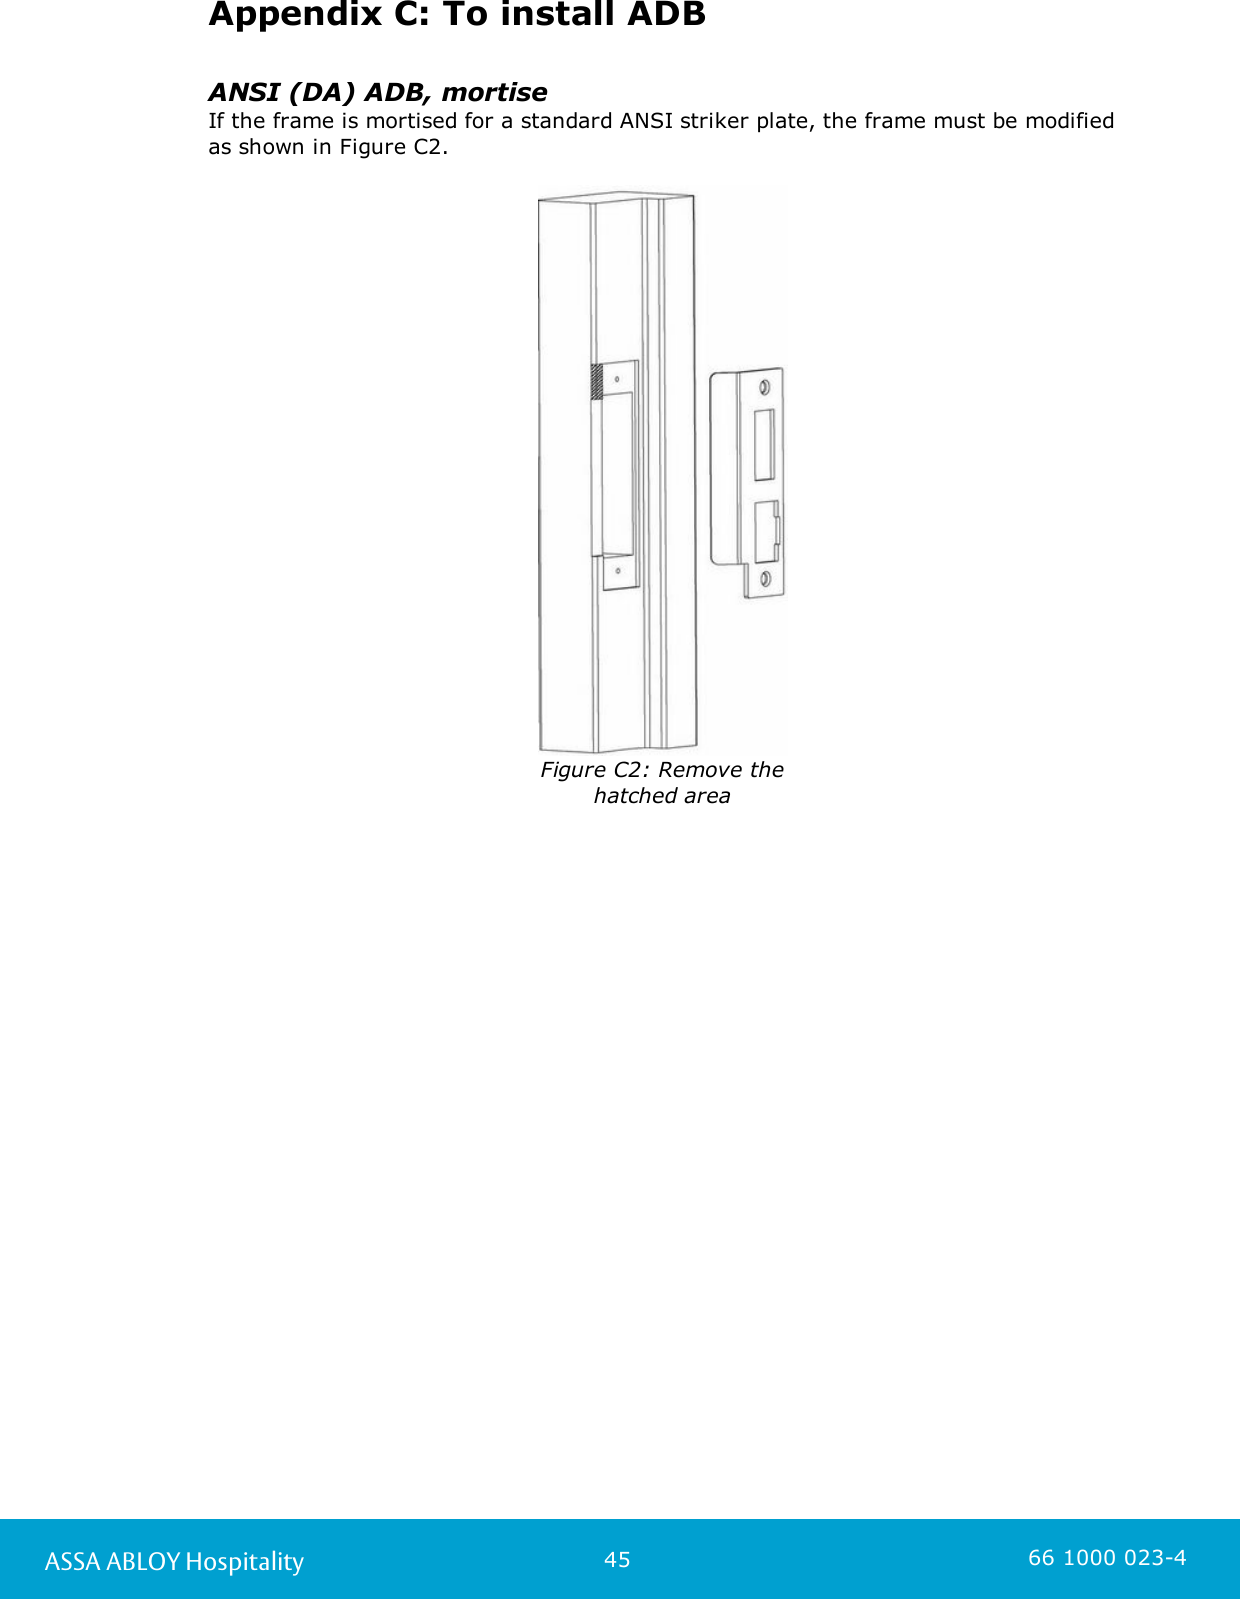 45ASSA ABLOY Hospitality 66 1000 023-4Appendix C: To install ADBANSI (DA) ADB, mortiseIf the frame is mortised for a standard ANSI striker plate, the frame must be modifiedas shown in Figure C2.Figure C2: Remove thehatched area